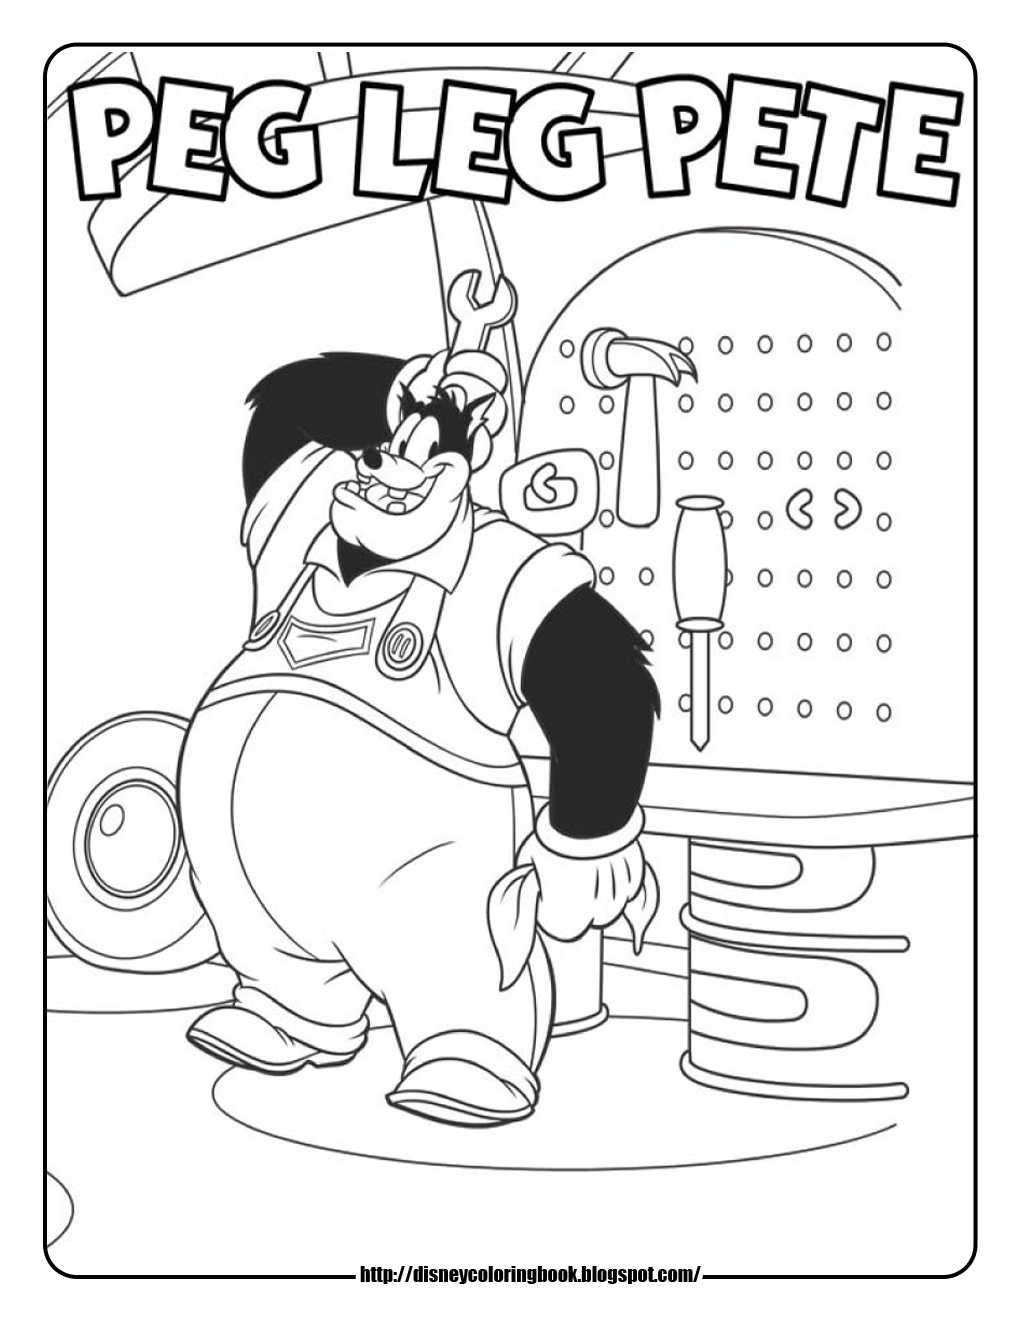 Disney Coloring Pages and Sheets for Kids: Mickey Mouse ...